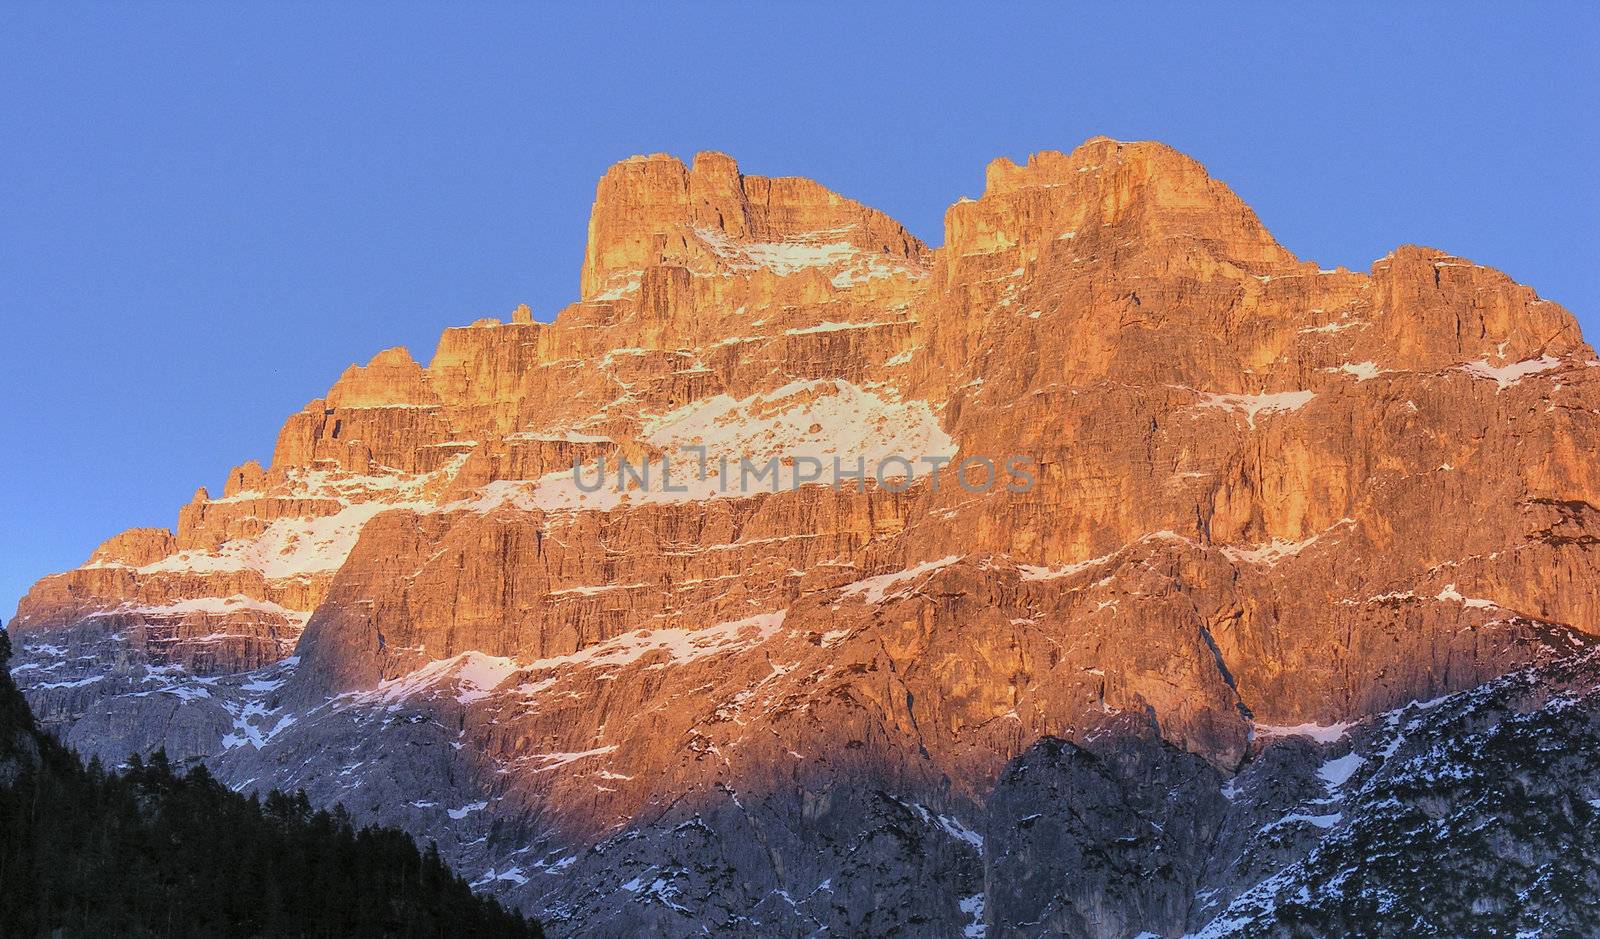 Dolomites Mountains at Sunset, Italy, February 2007 by jovannig